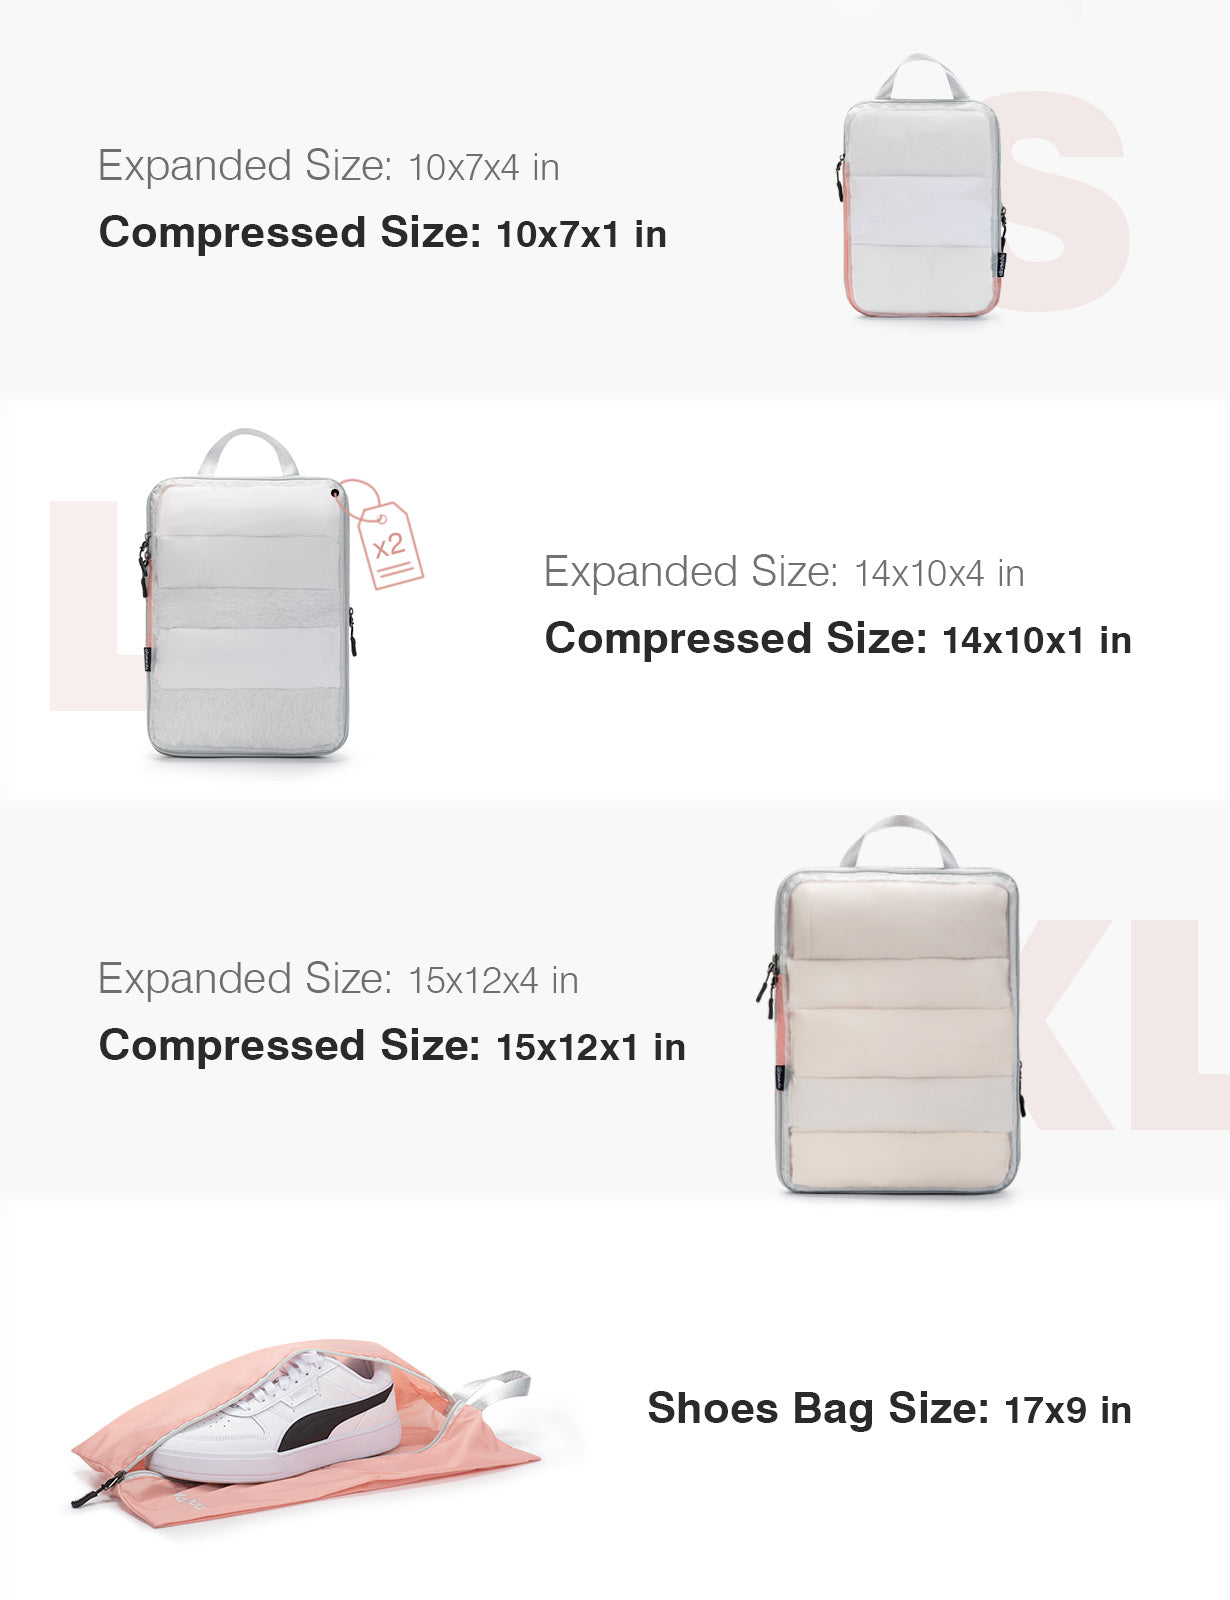 Compression Packing Cubes Travel - See Through Mesh Packing Cubes for Suitcases Set Luggage Organizer Bags for Travel Accessories with Shoe Bag